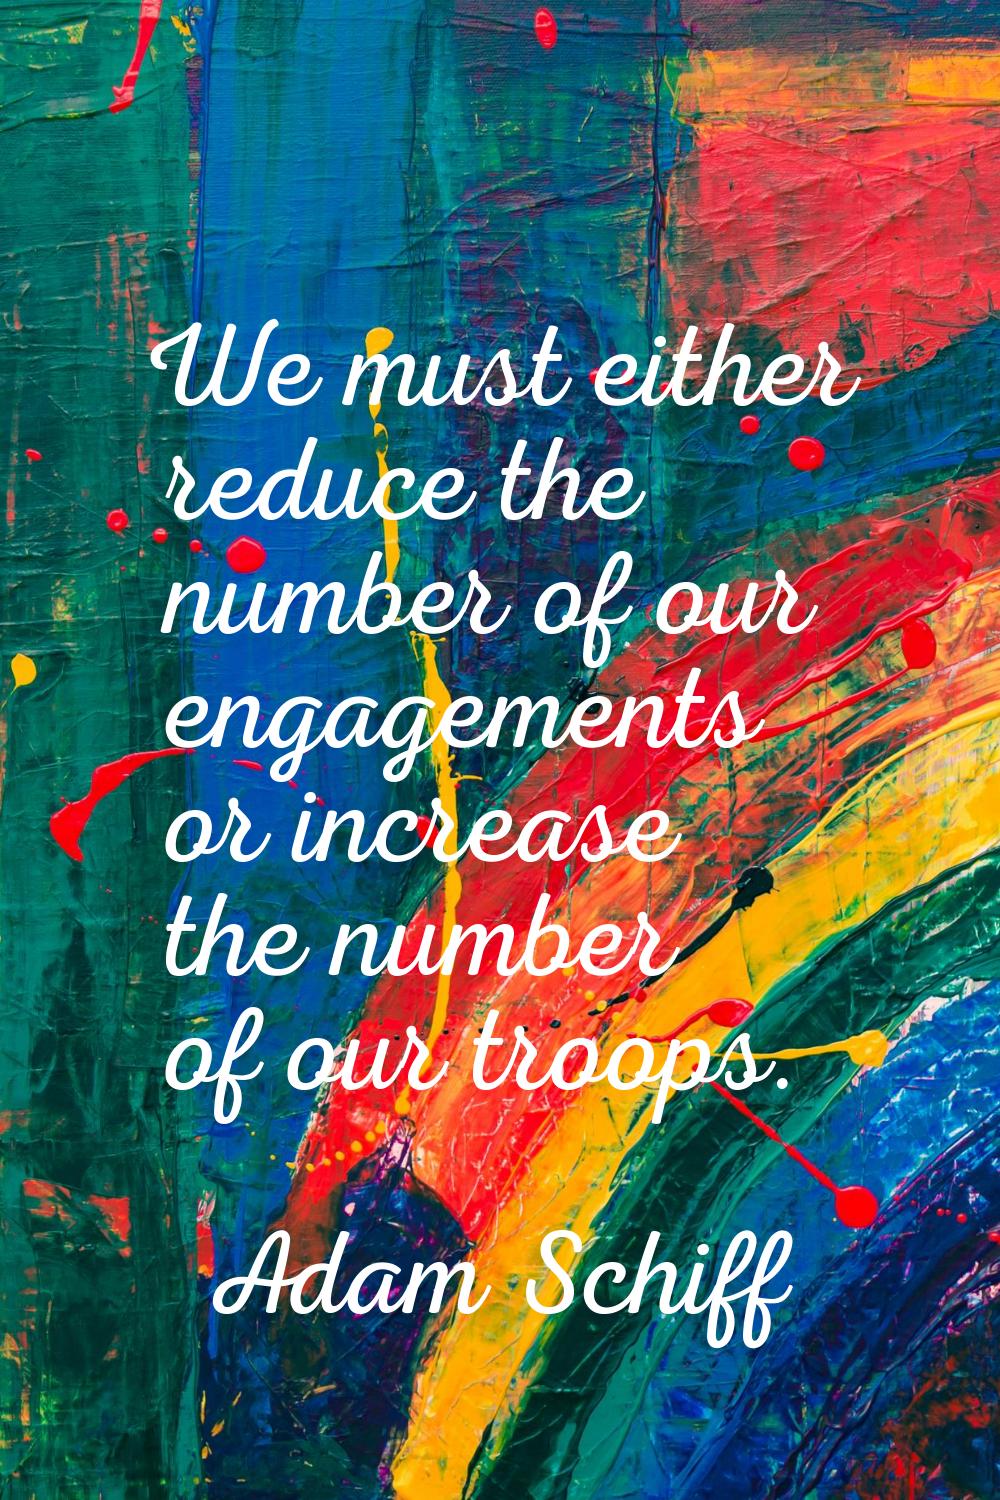 We must either reduce the number of our engagements or increase the number of our troops.